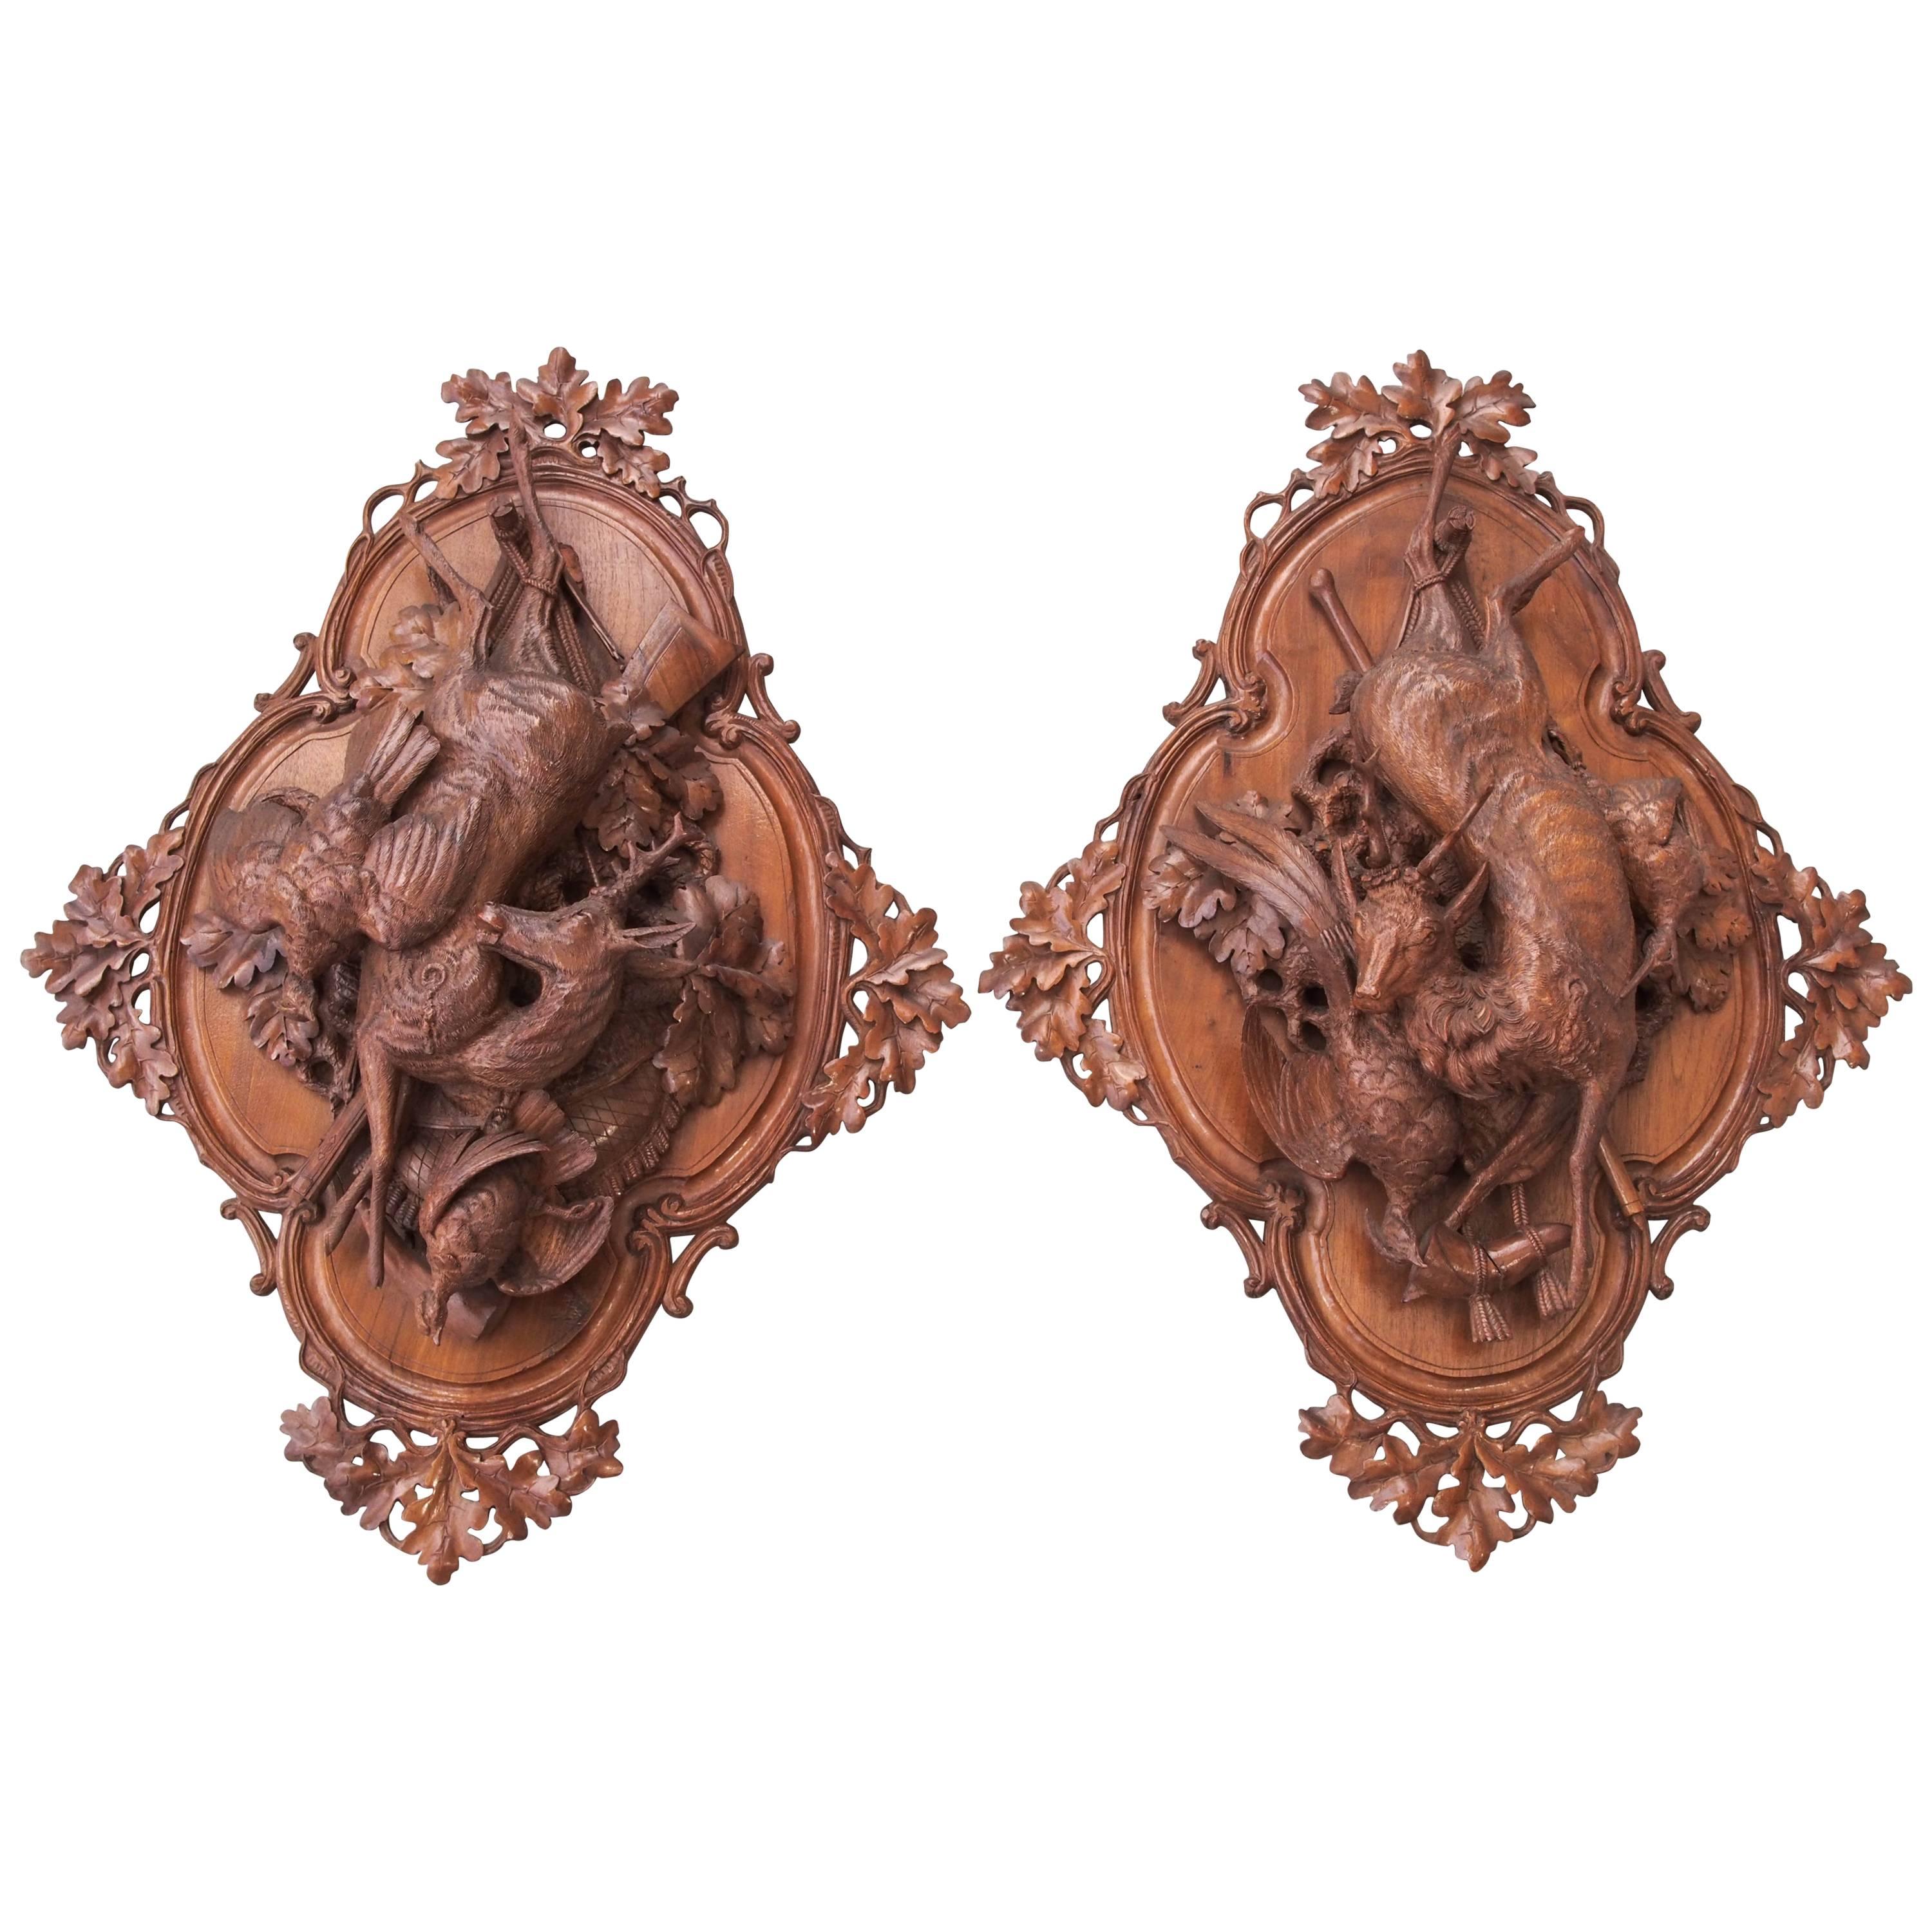 Pair of Black Forest Wall Plaques of Game